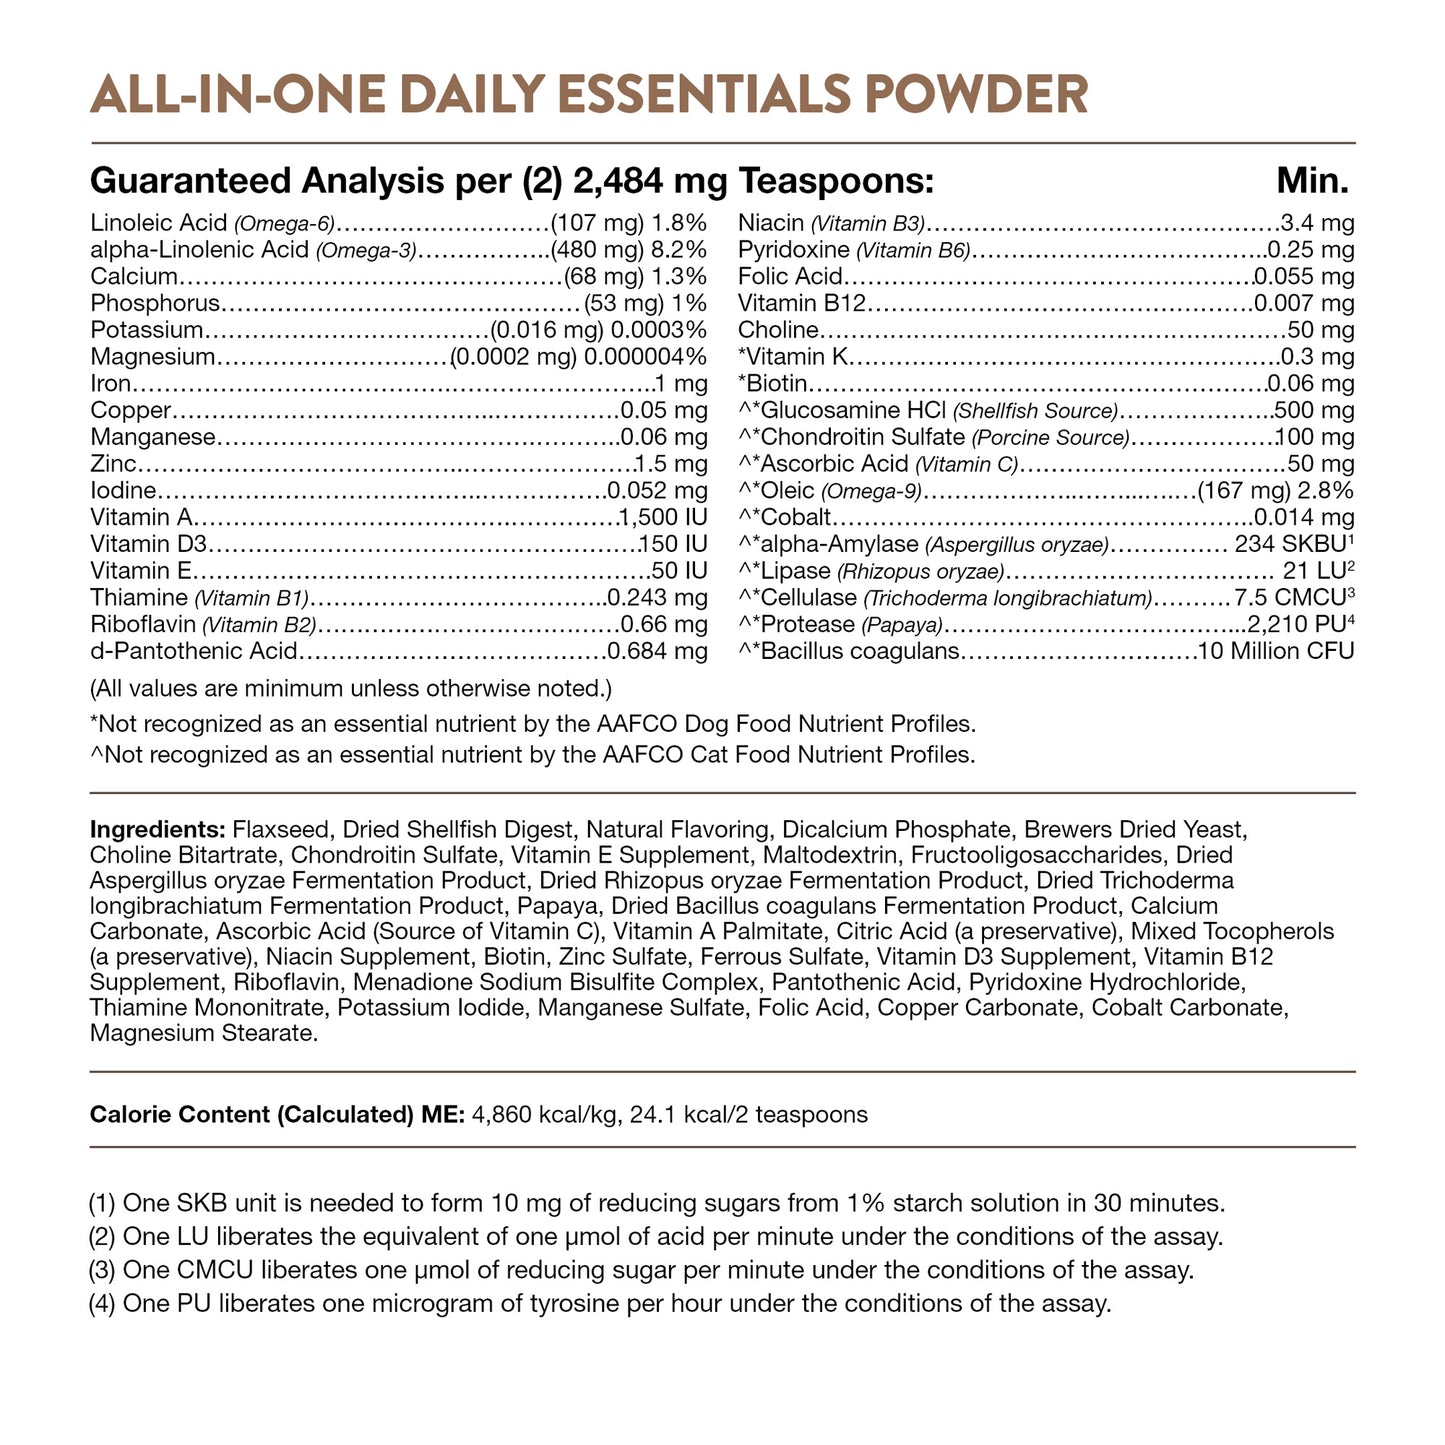 All-In-One Supplement Powder